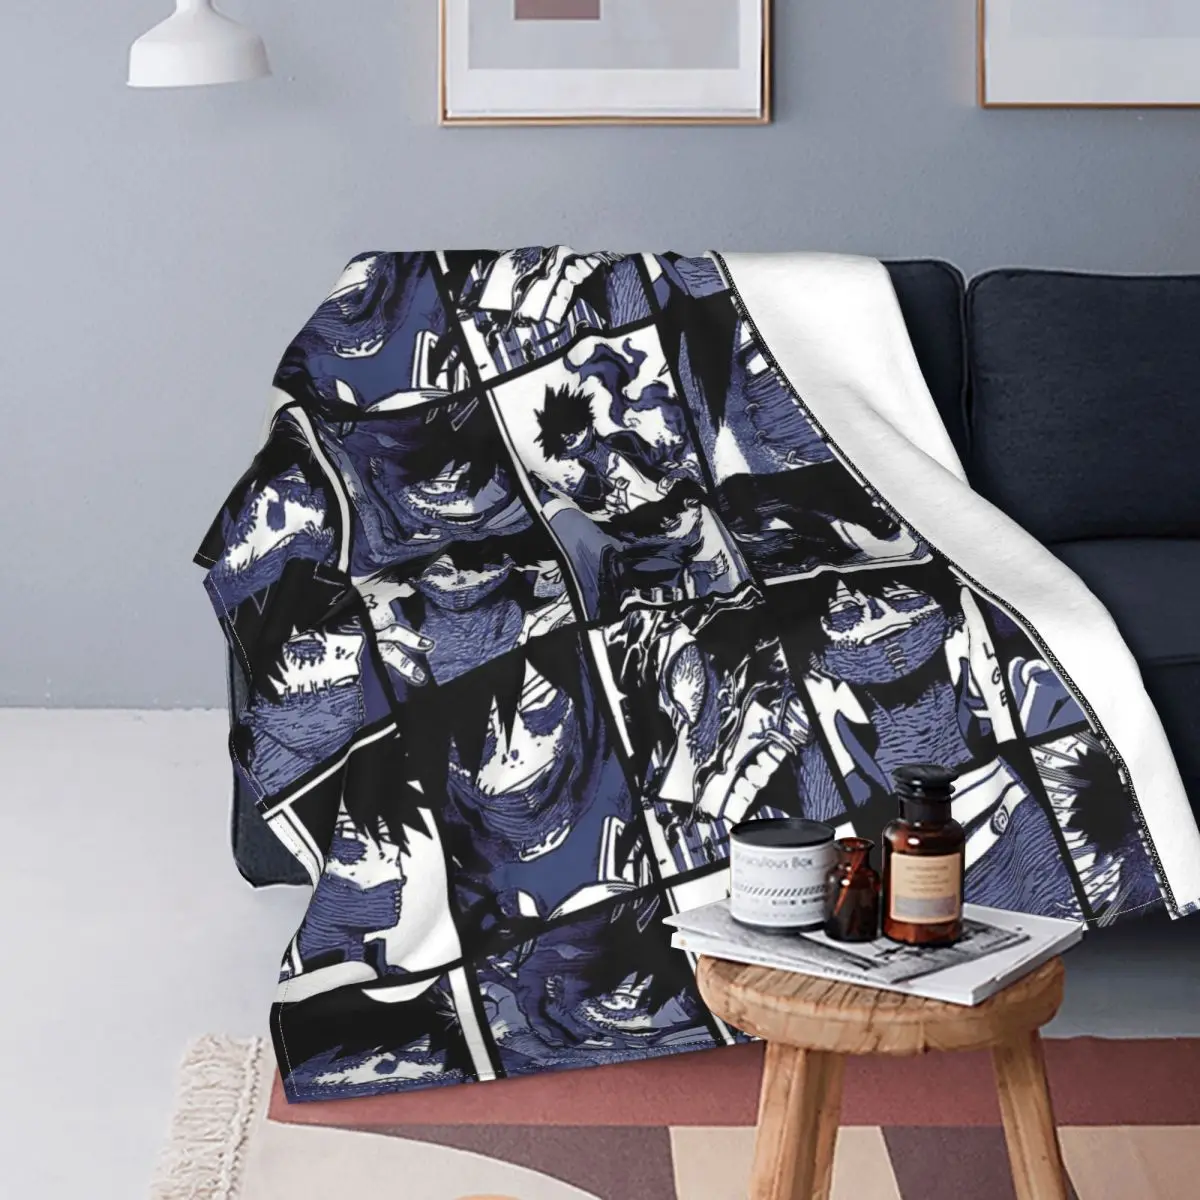 

Dabi Collage Flannel Throw Blanket Boku No My Hero Academia Plaid Anime Blanket for Home Car Lightweight Bedroom Quilt